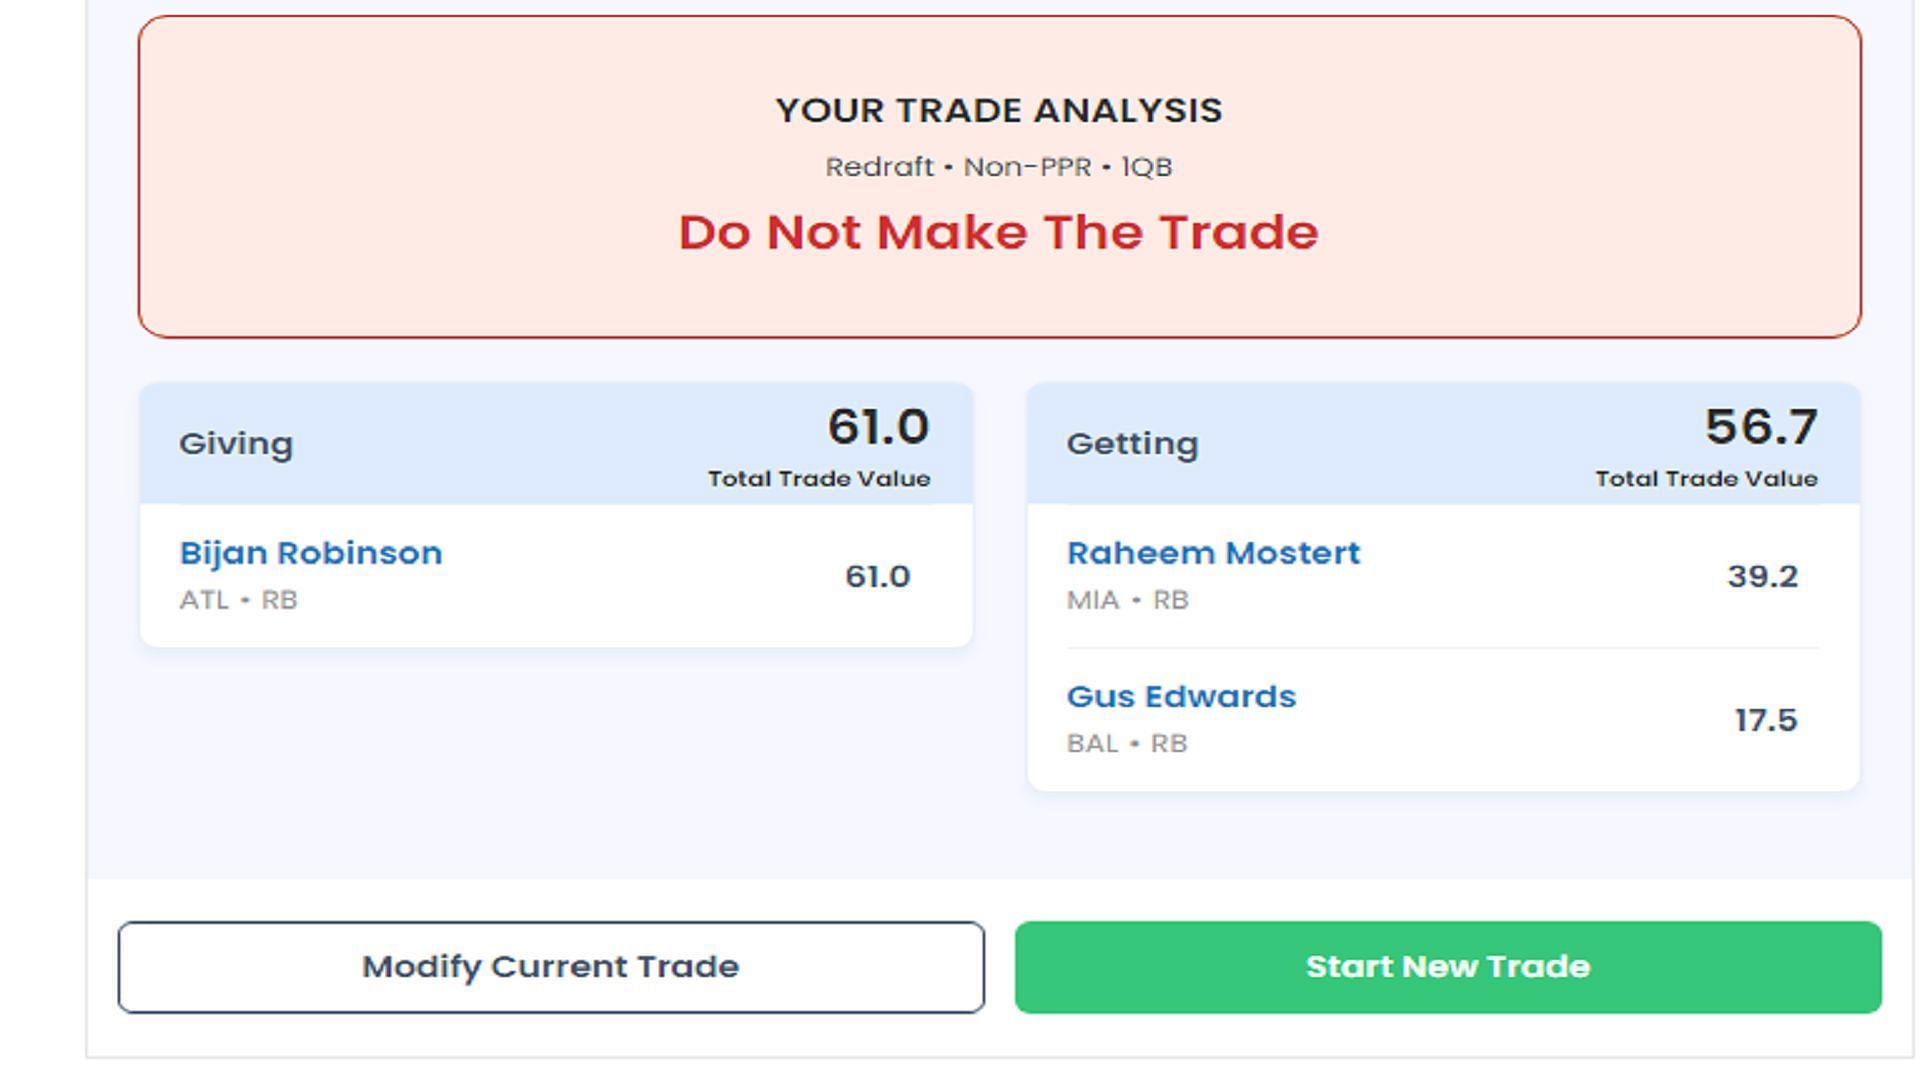 Trade results for Raheem Mostert and Gus Edwards